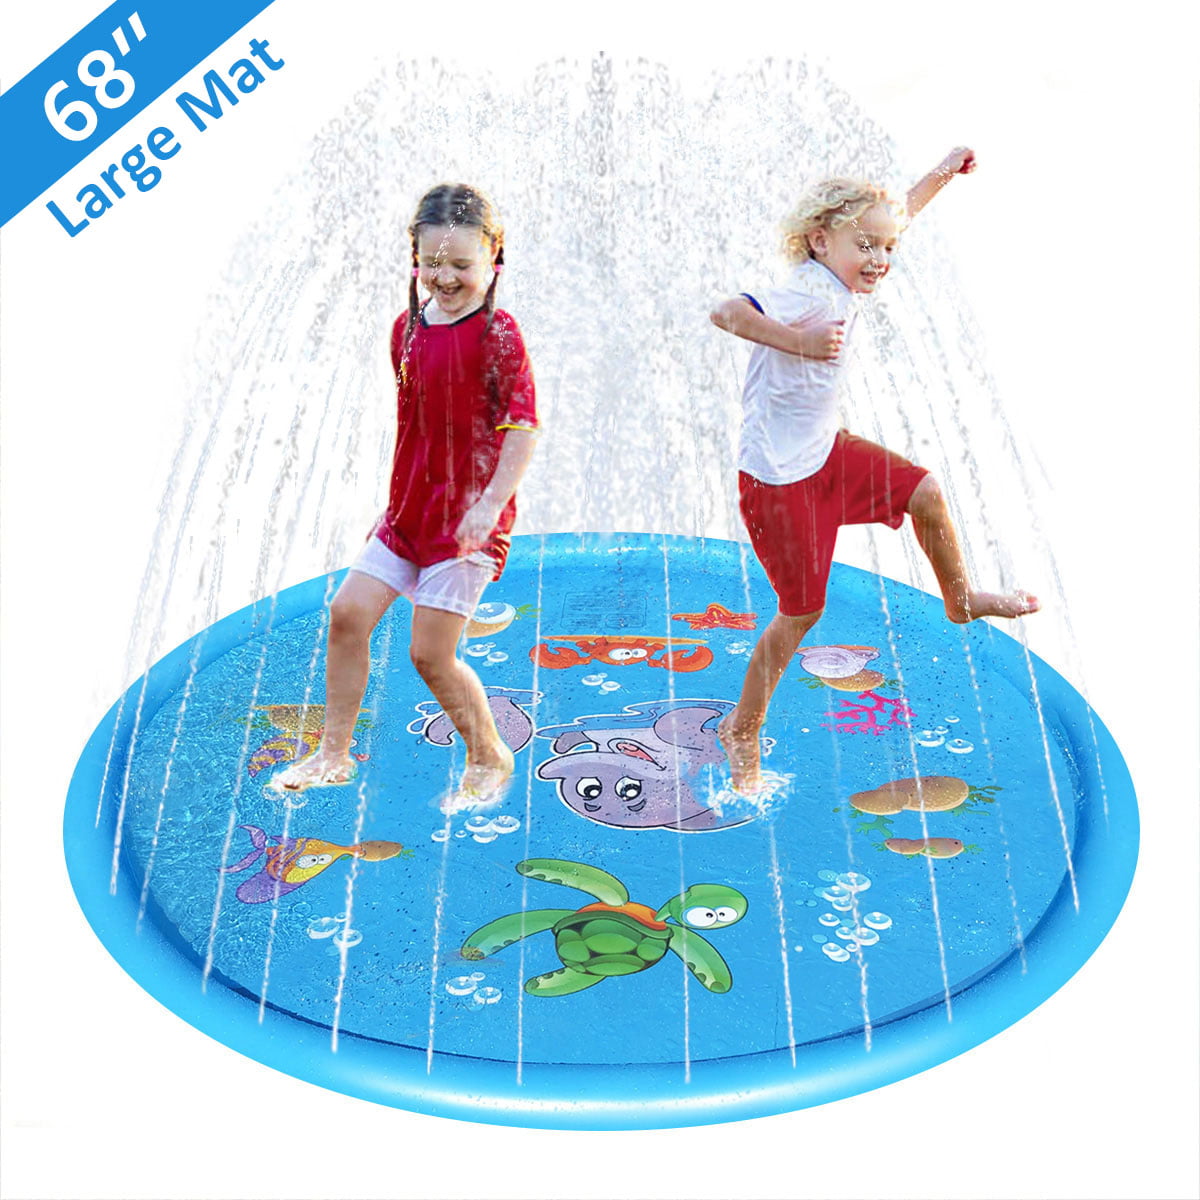 Aitsite Splash Pad 68 Summer Outdoor Water Play Mat Sprinkler Spray Pad Inflatable Water Fun Toys for Kids Children Infants Toddlers 